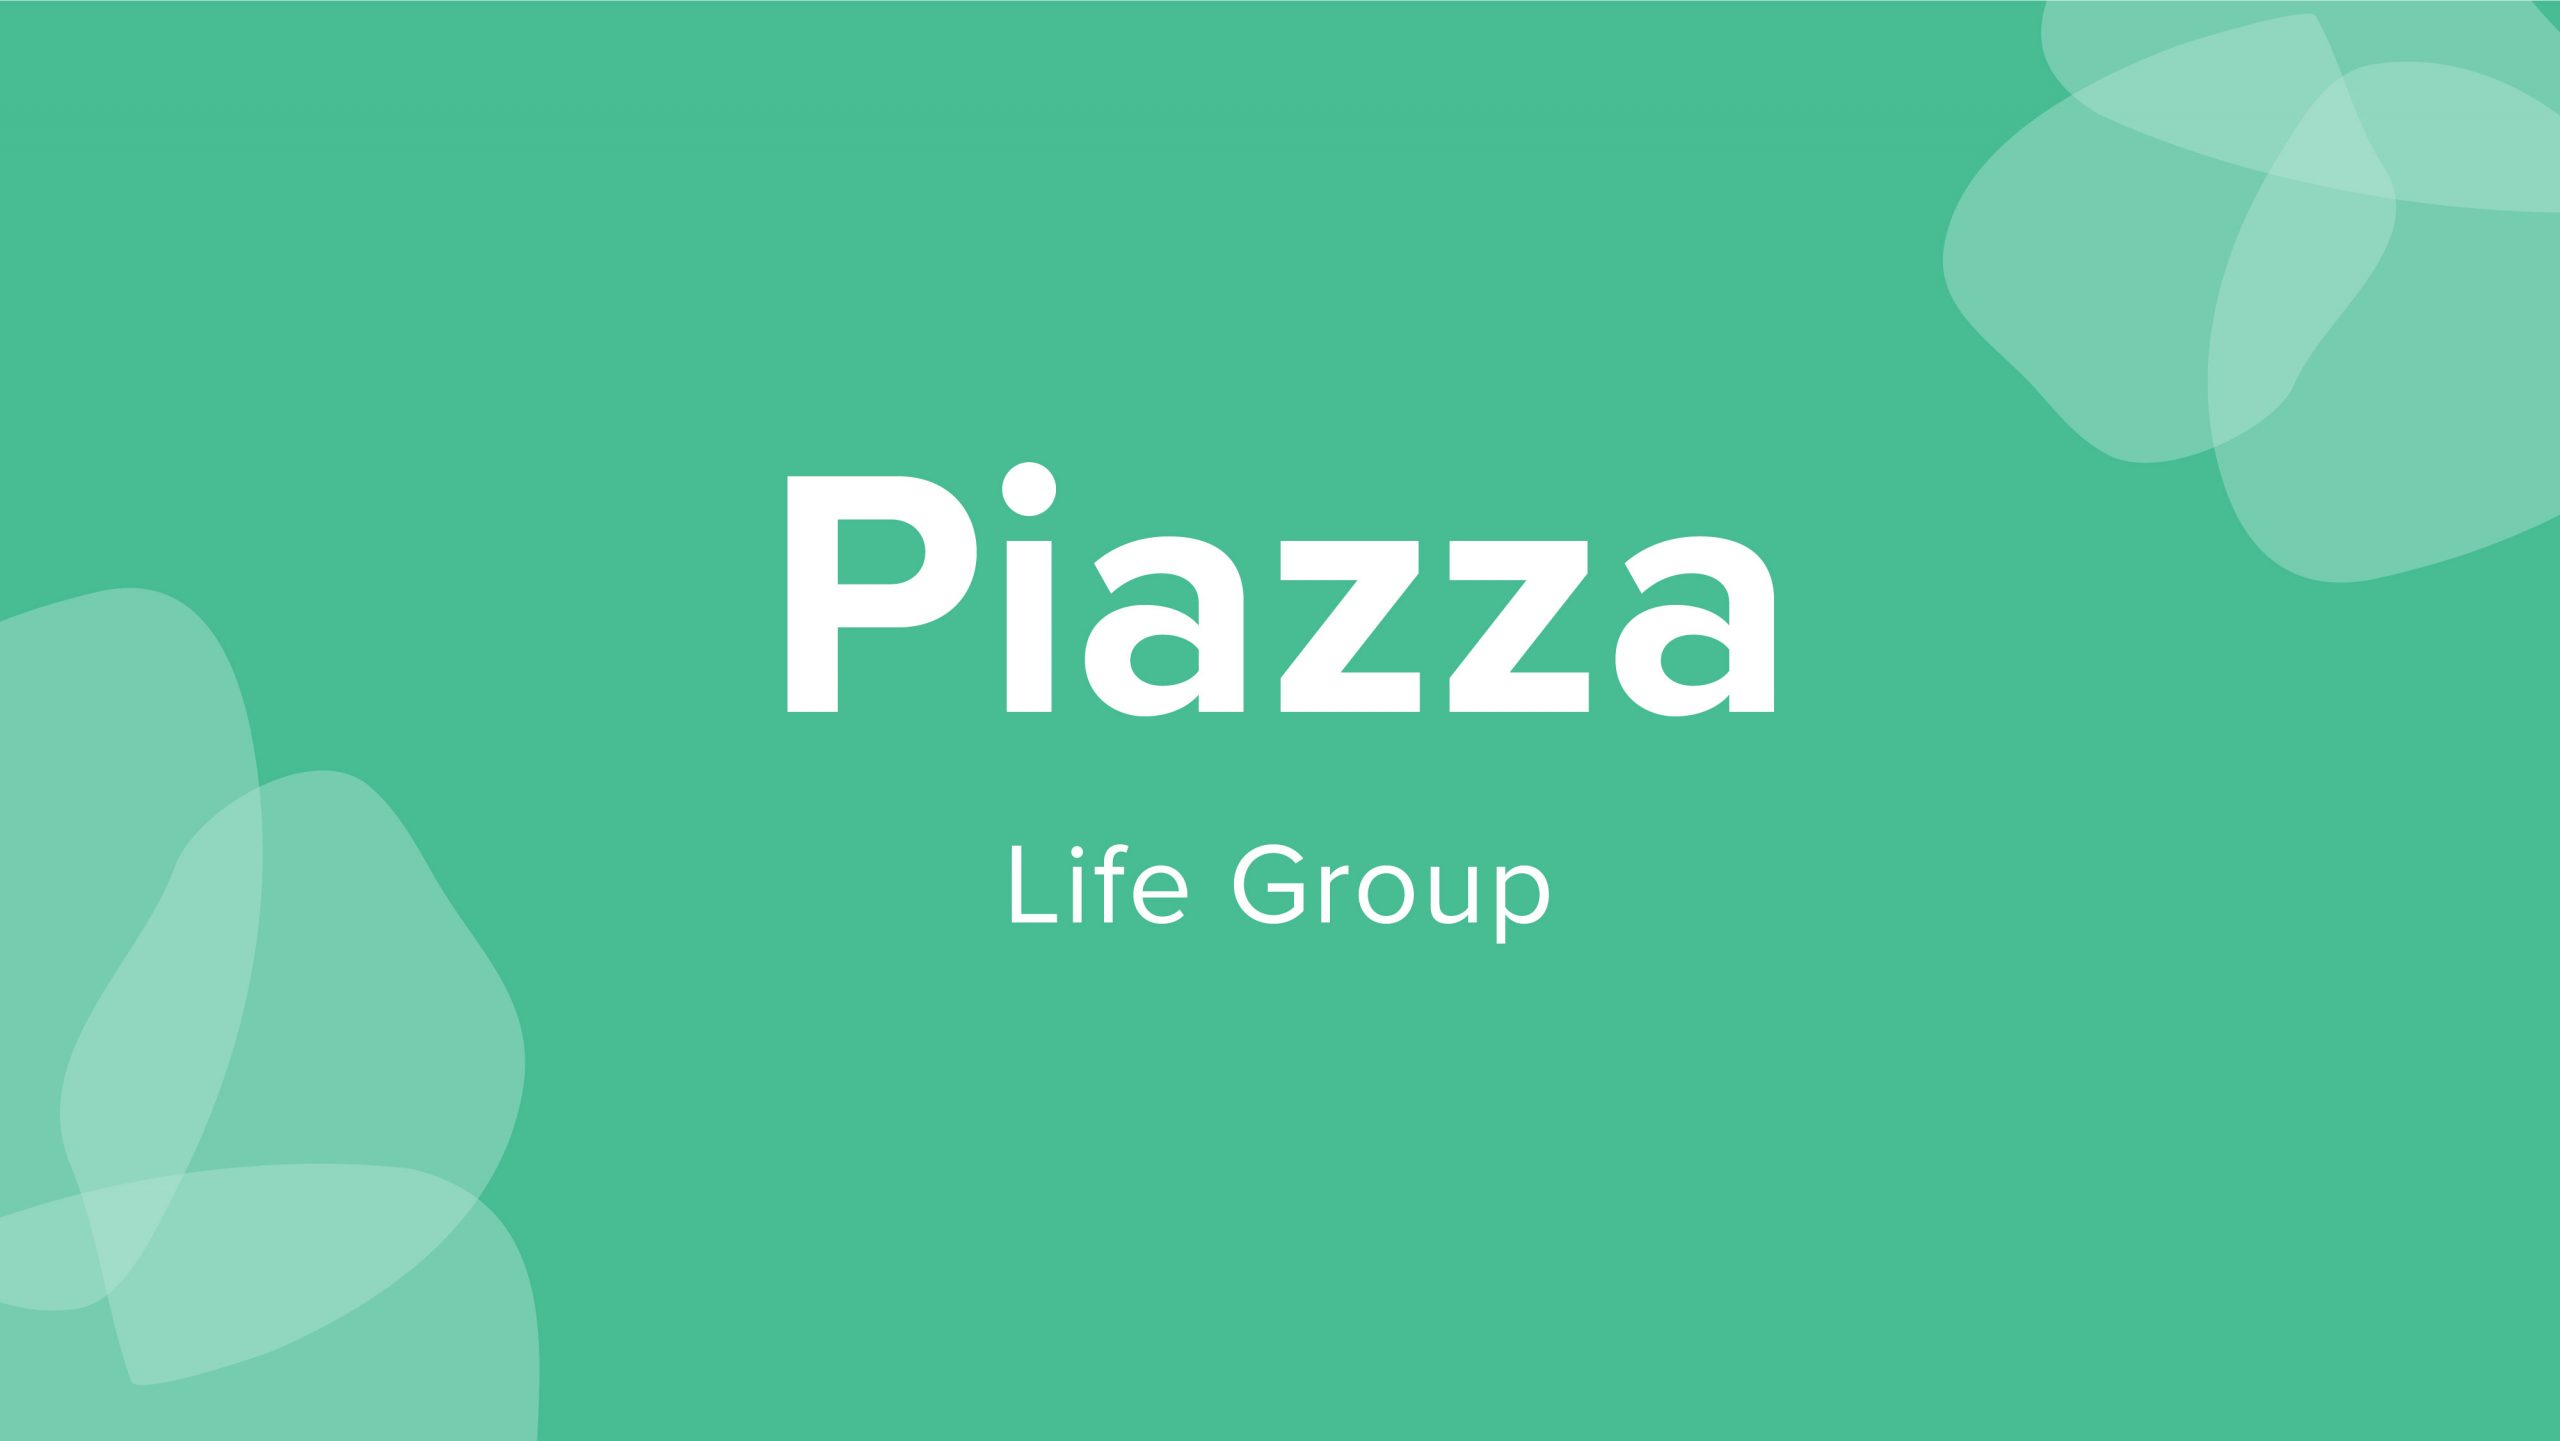 Piazza Life Group